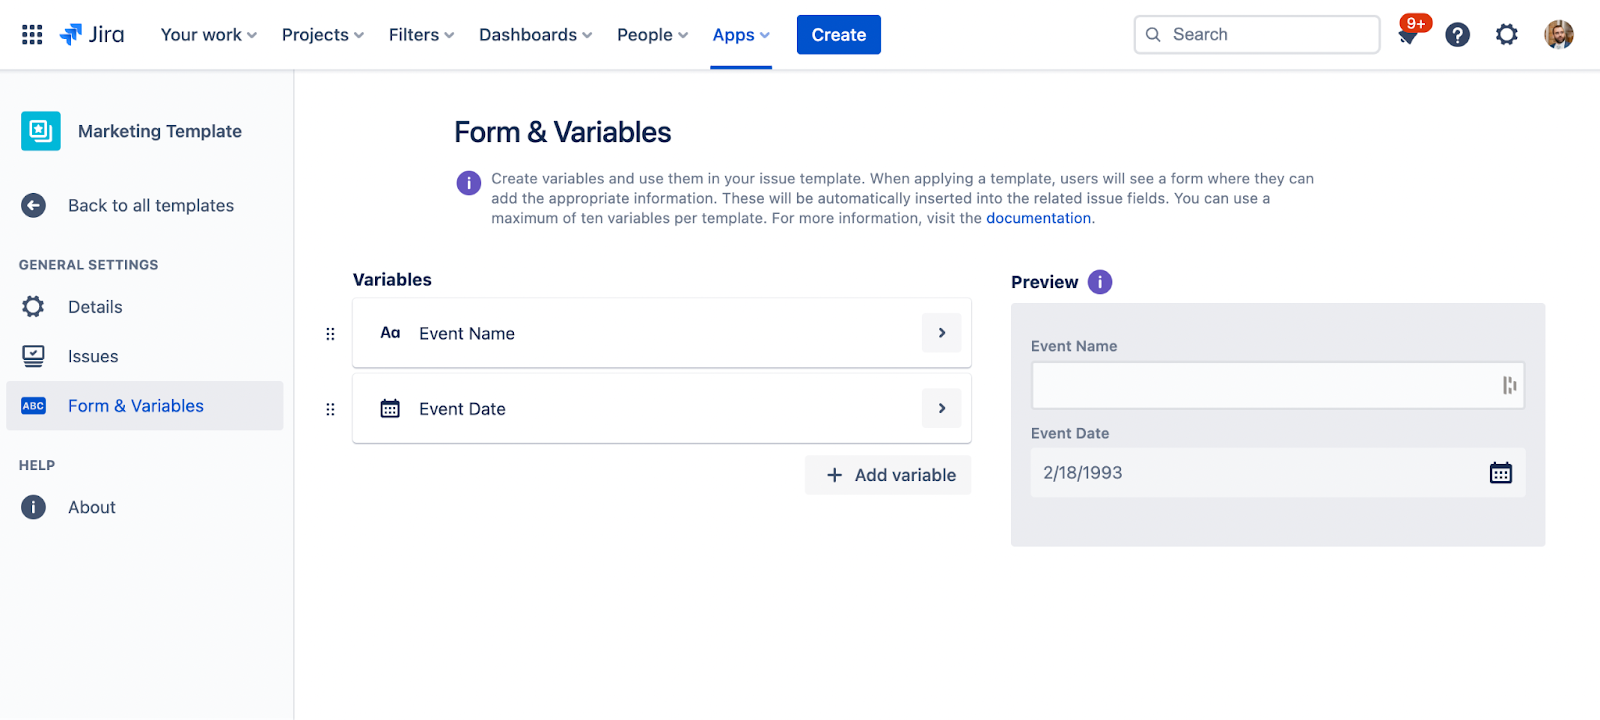 How to better plan events with Jira Cloud and Easy Issue Templates - setting up variables in the Forms & Variables menu